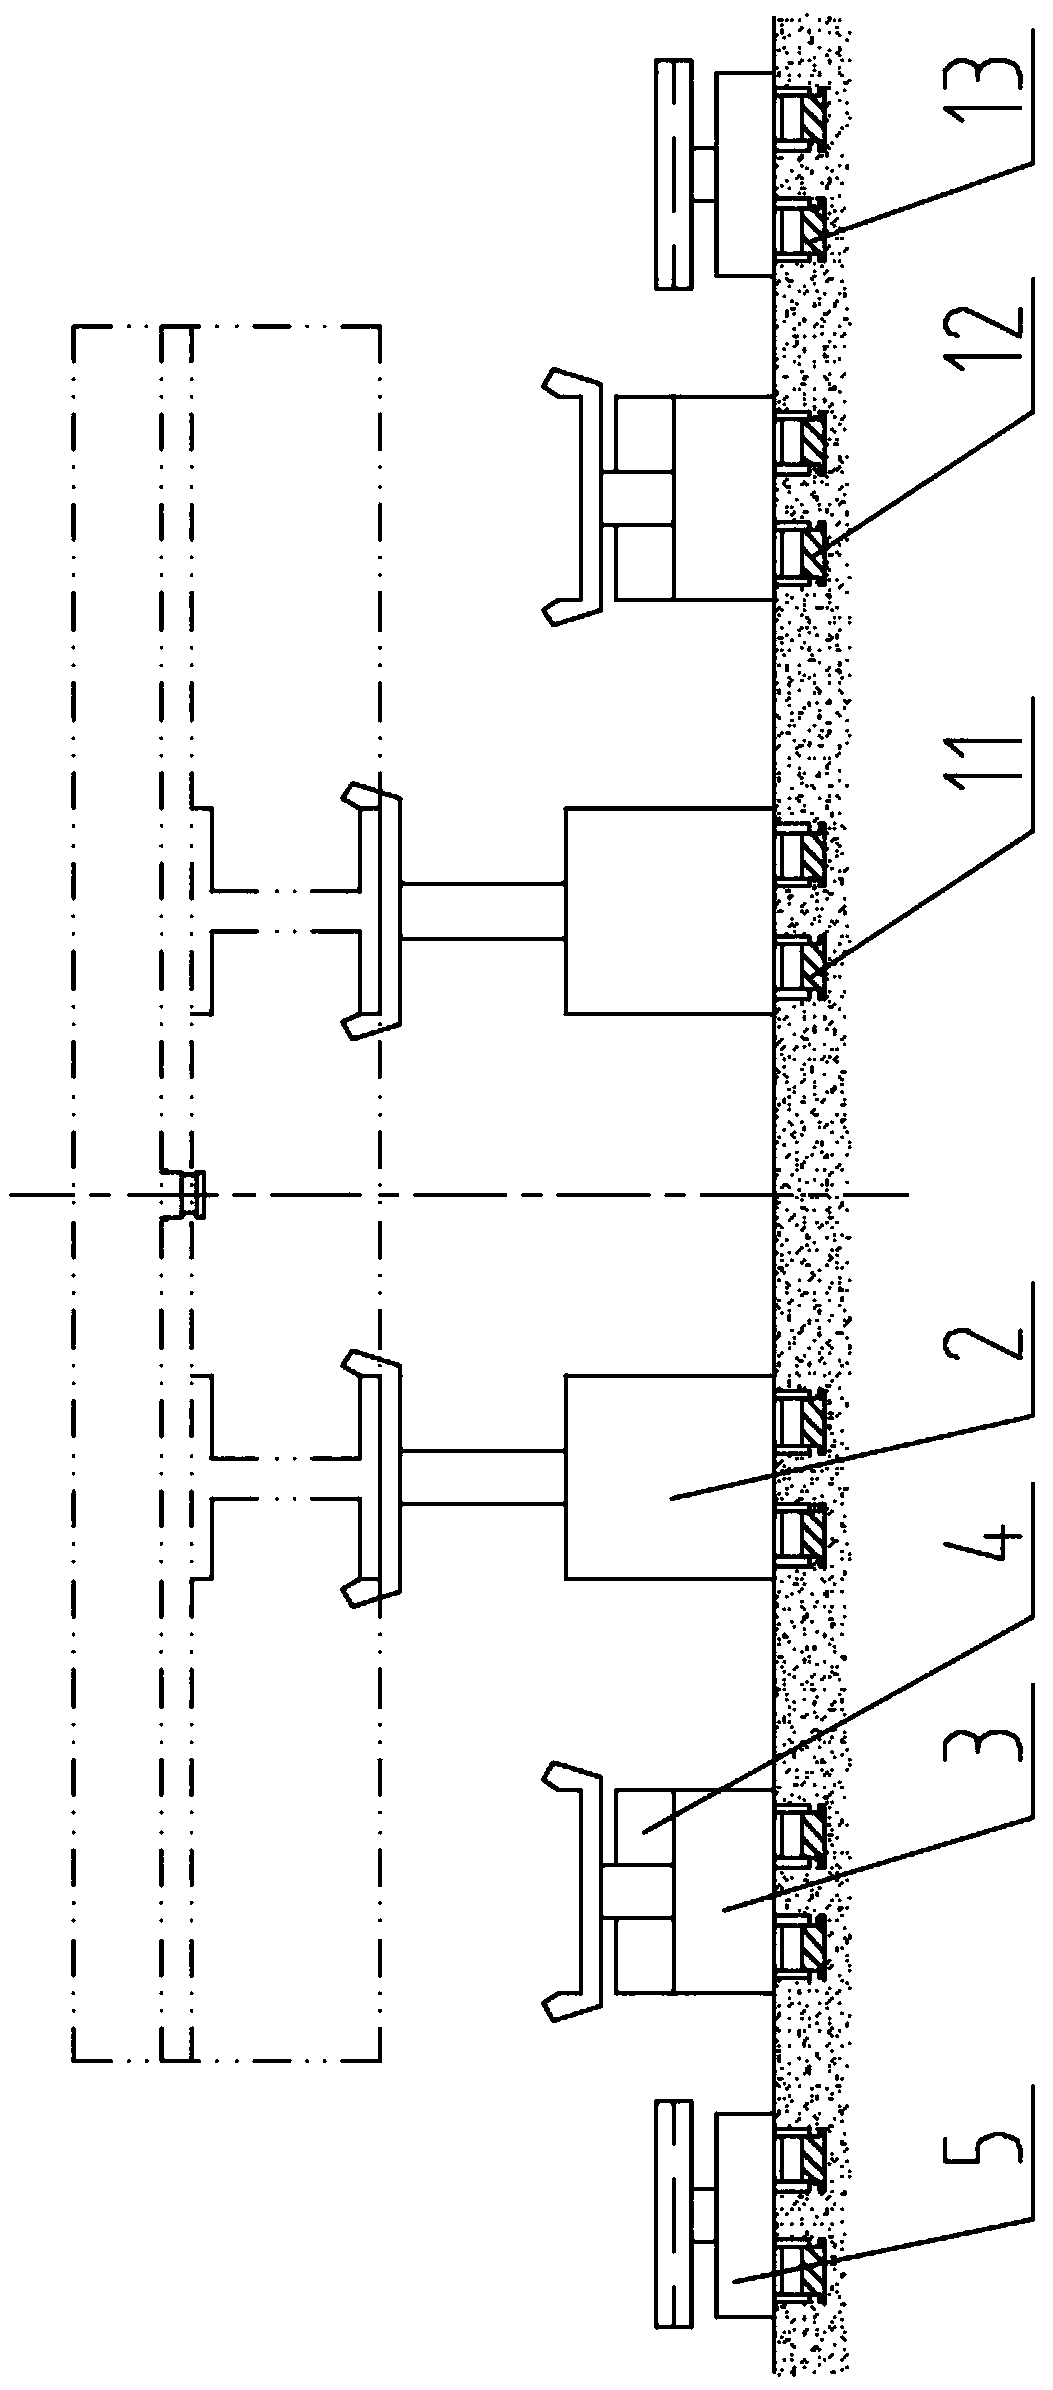 A method of using a trailer assembly system